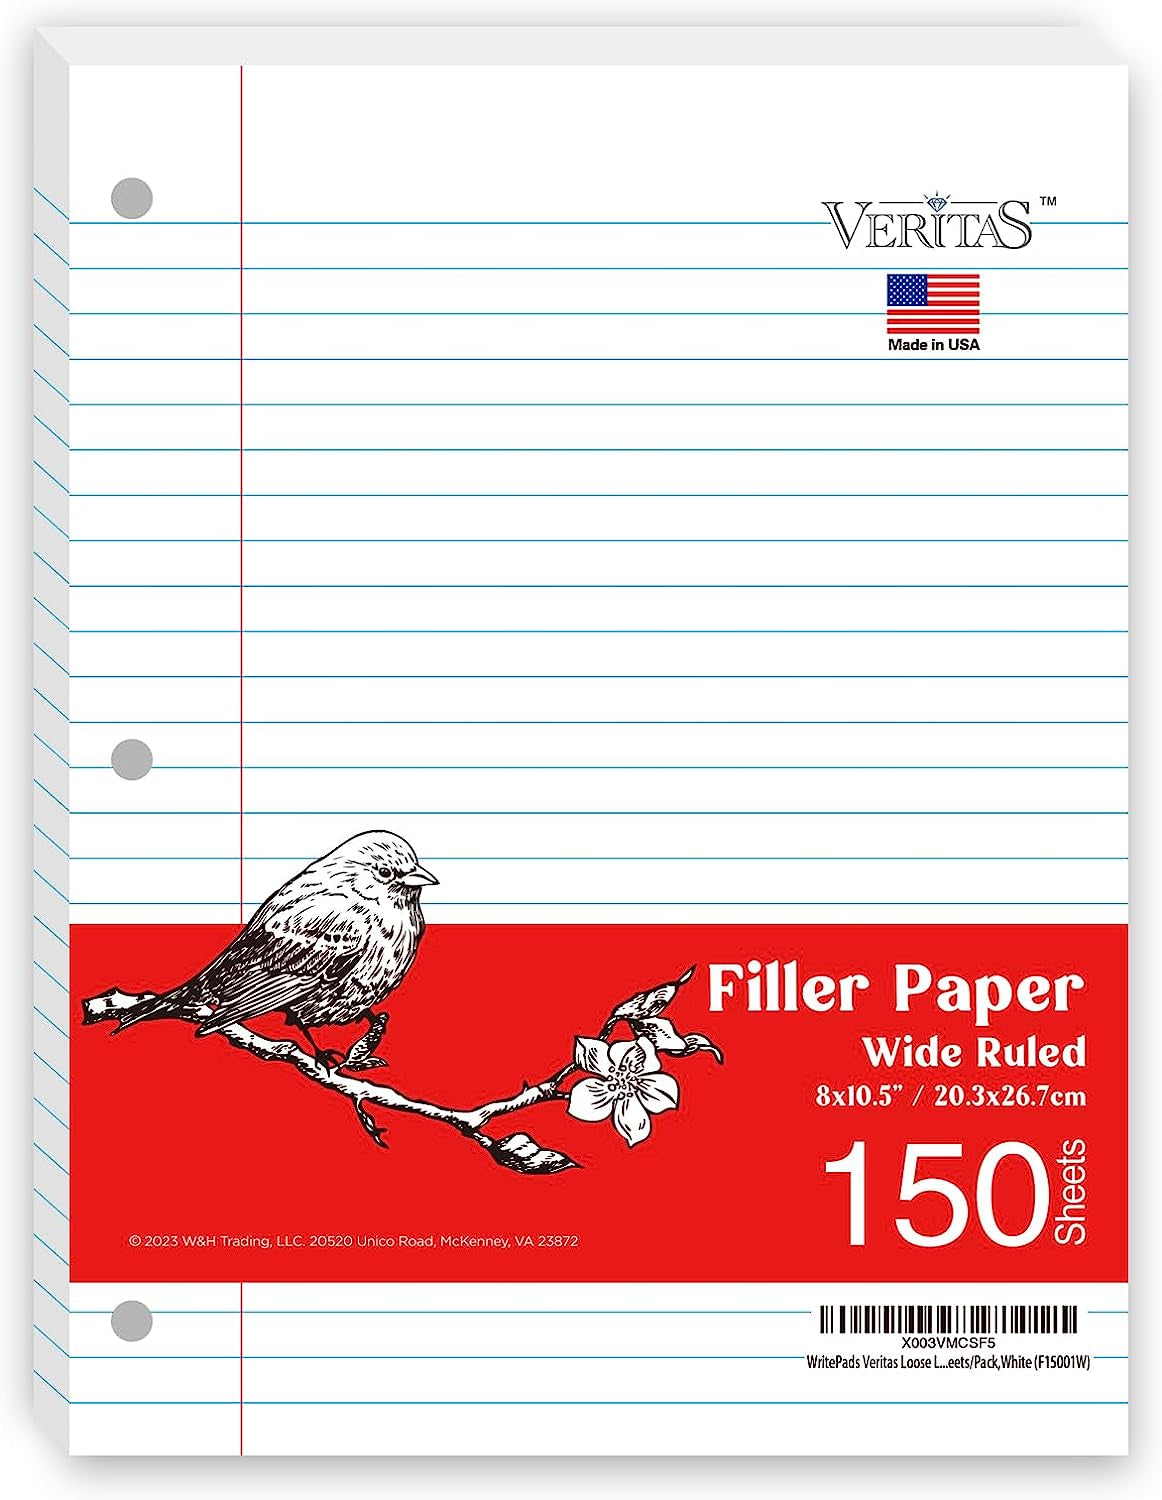 Notebook Paper Loose Leaf Paper, Standard 8"X10-1/2" Wide Ruled Filler Paper,3 Hole Punched Binder Paper for 3 Ring Binder,150 Sheets/Pack, 4 Pack White (F60001W)